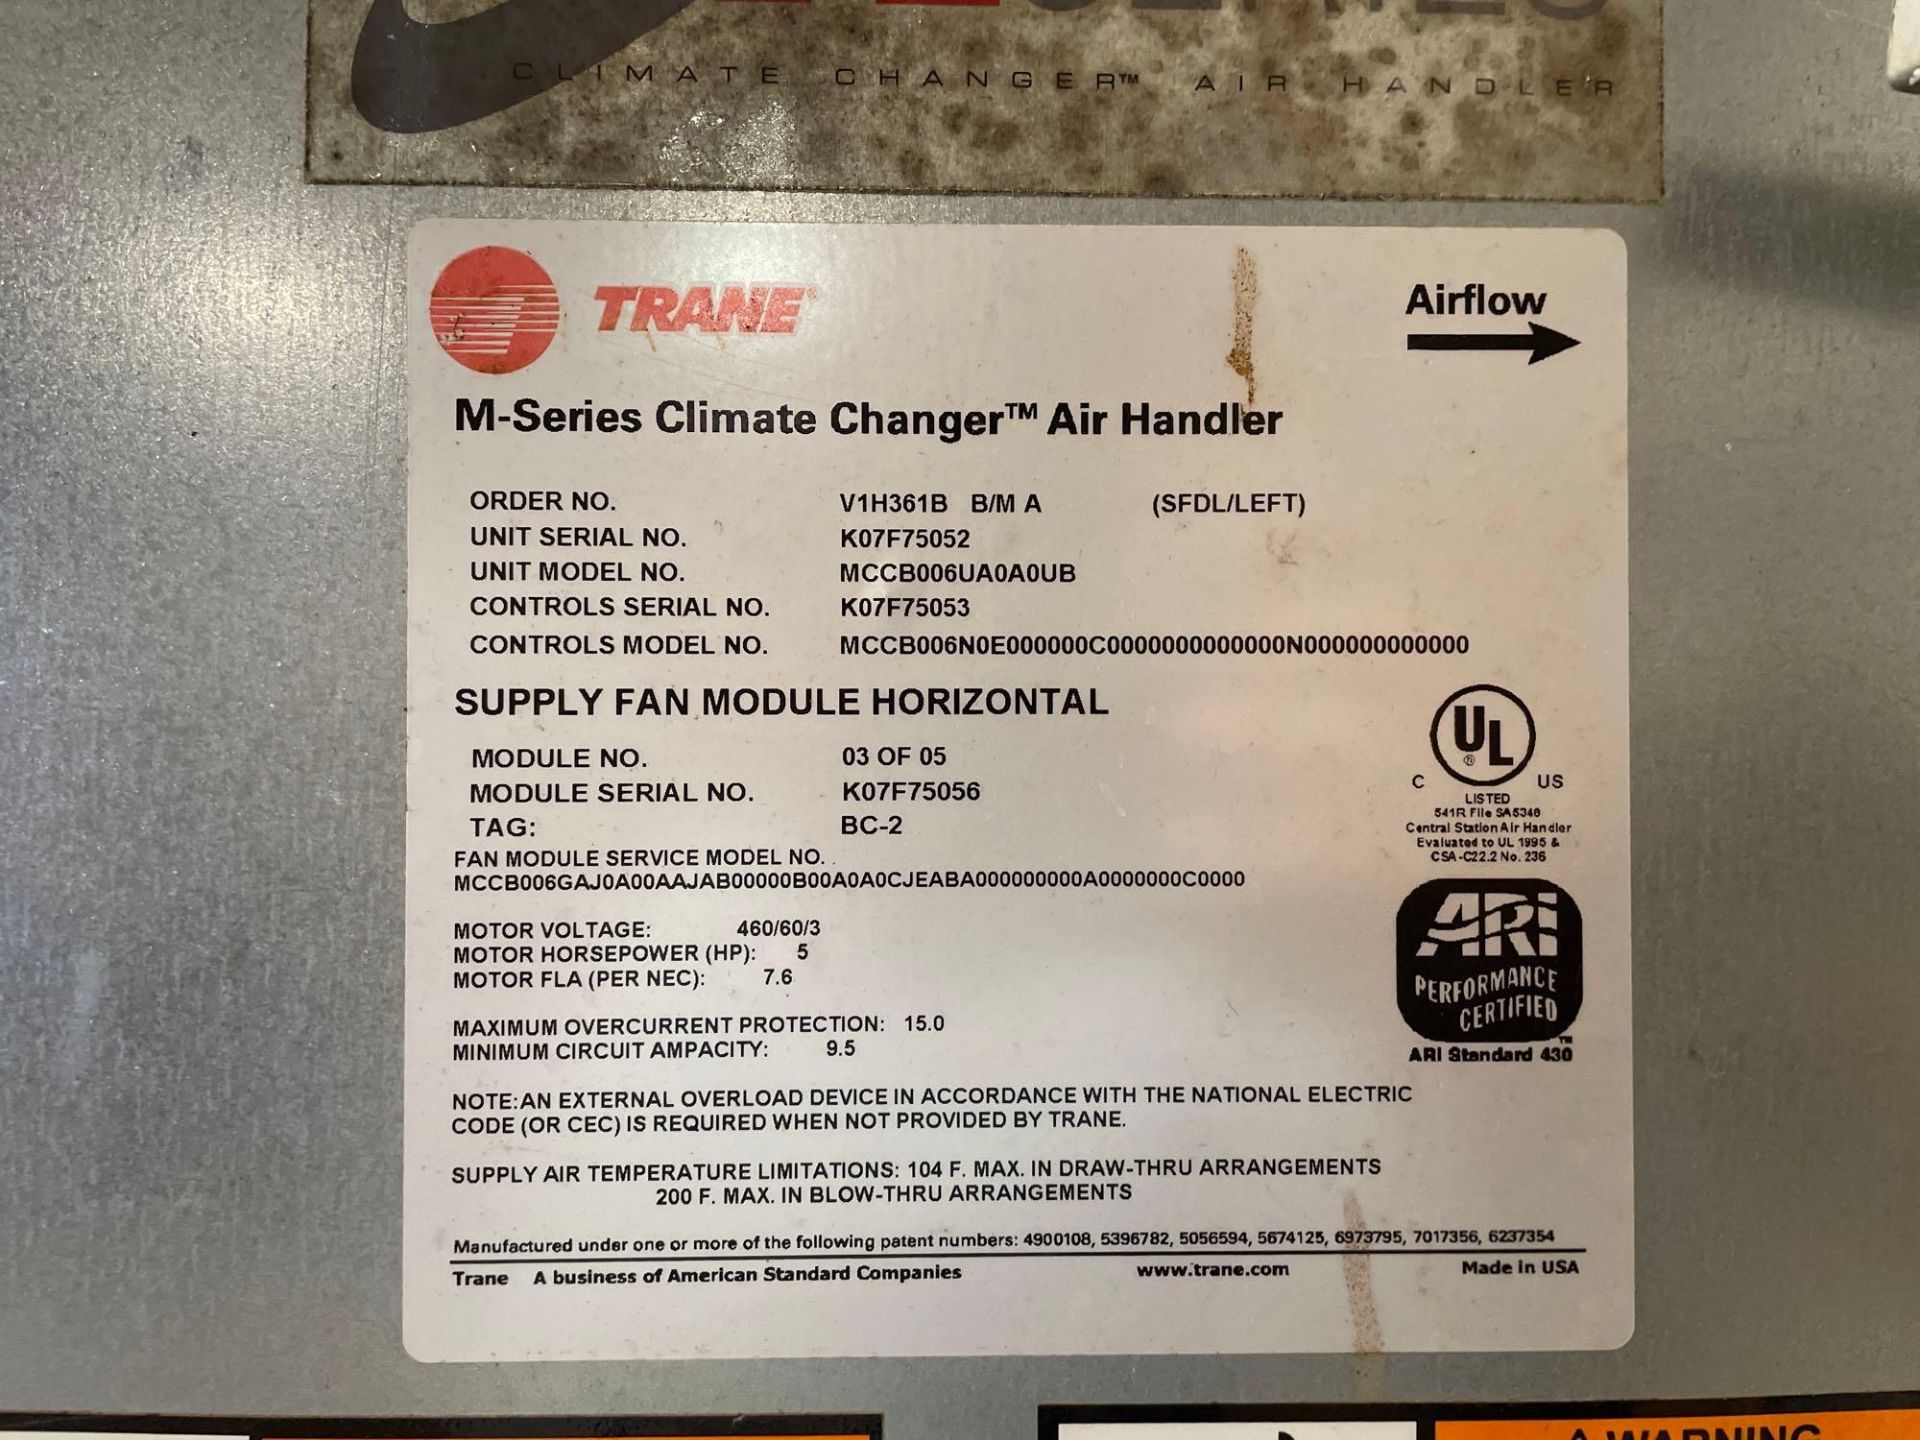 Lot of 2: Trane M-Series Climate Changer Air Handler, Model 03OF05 - Image 3 of 6